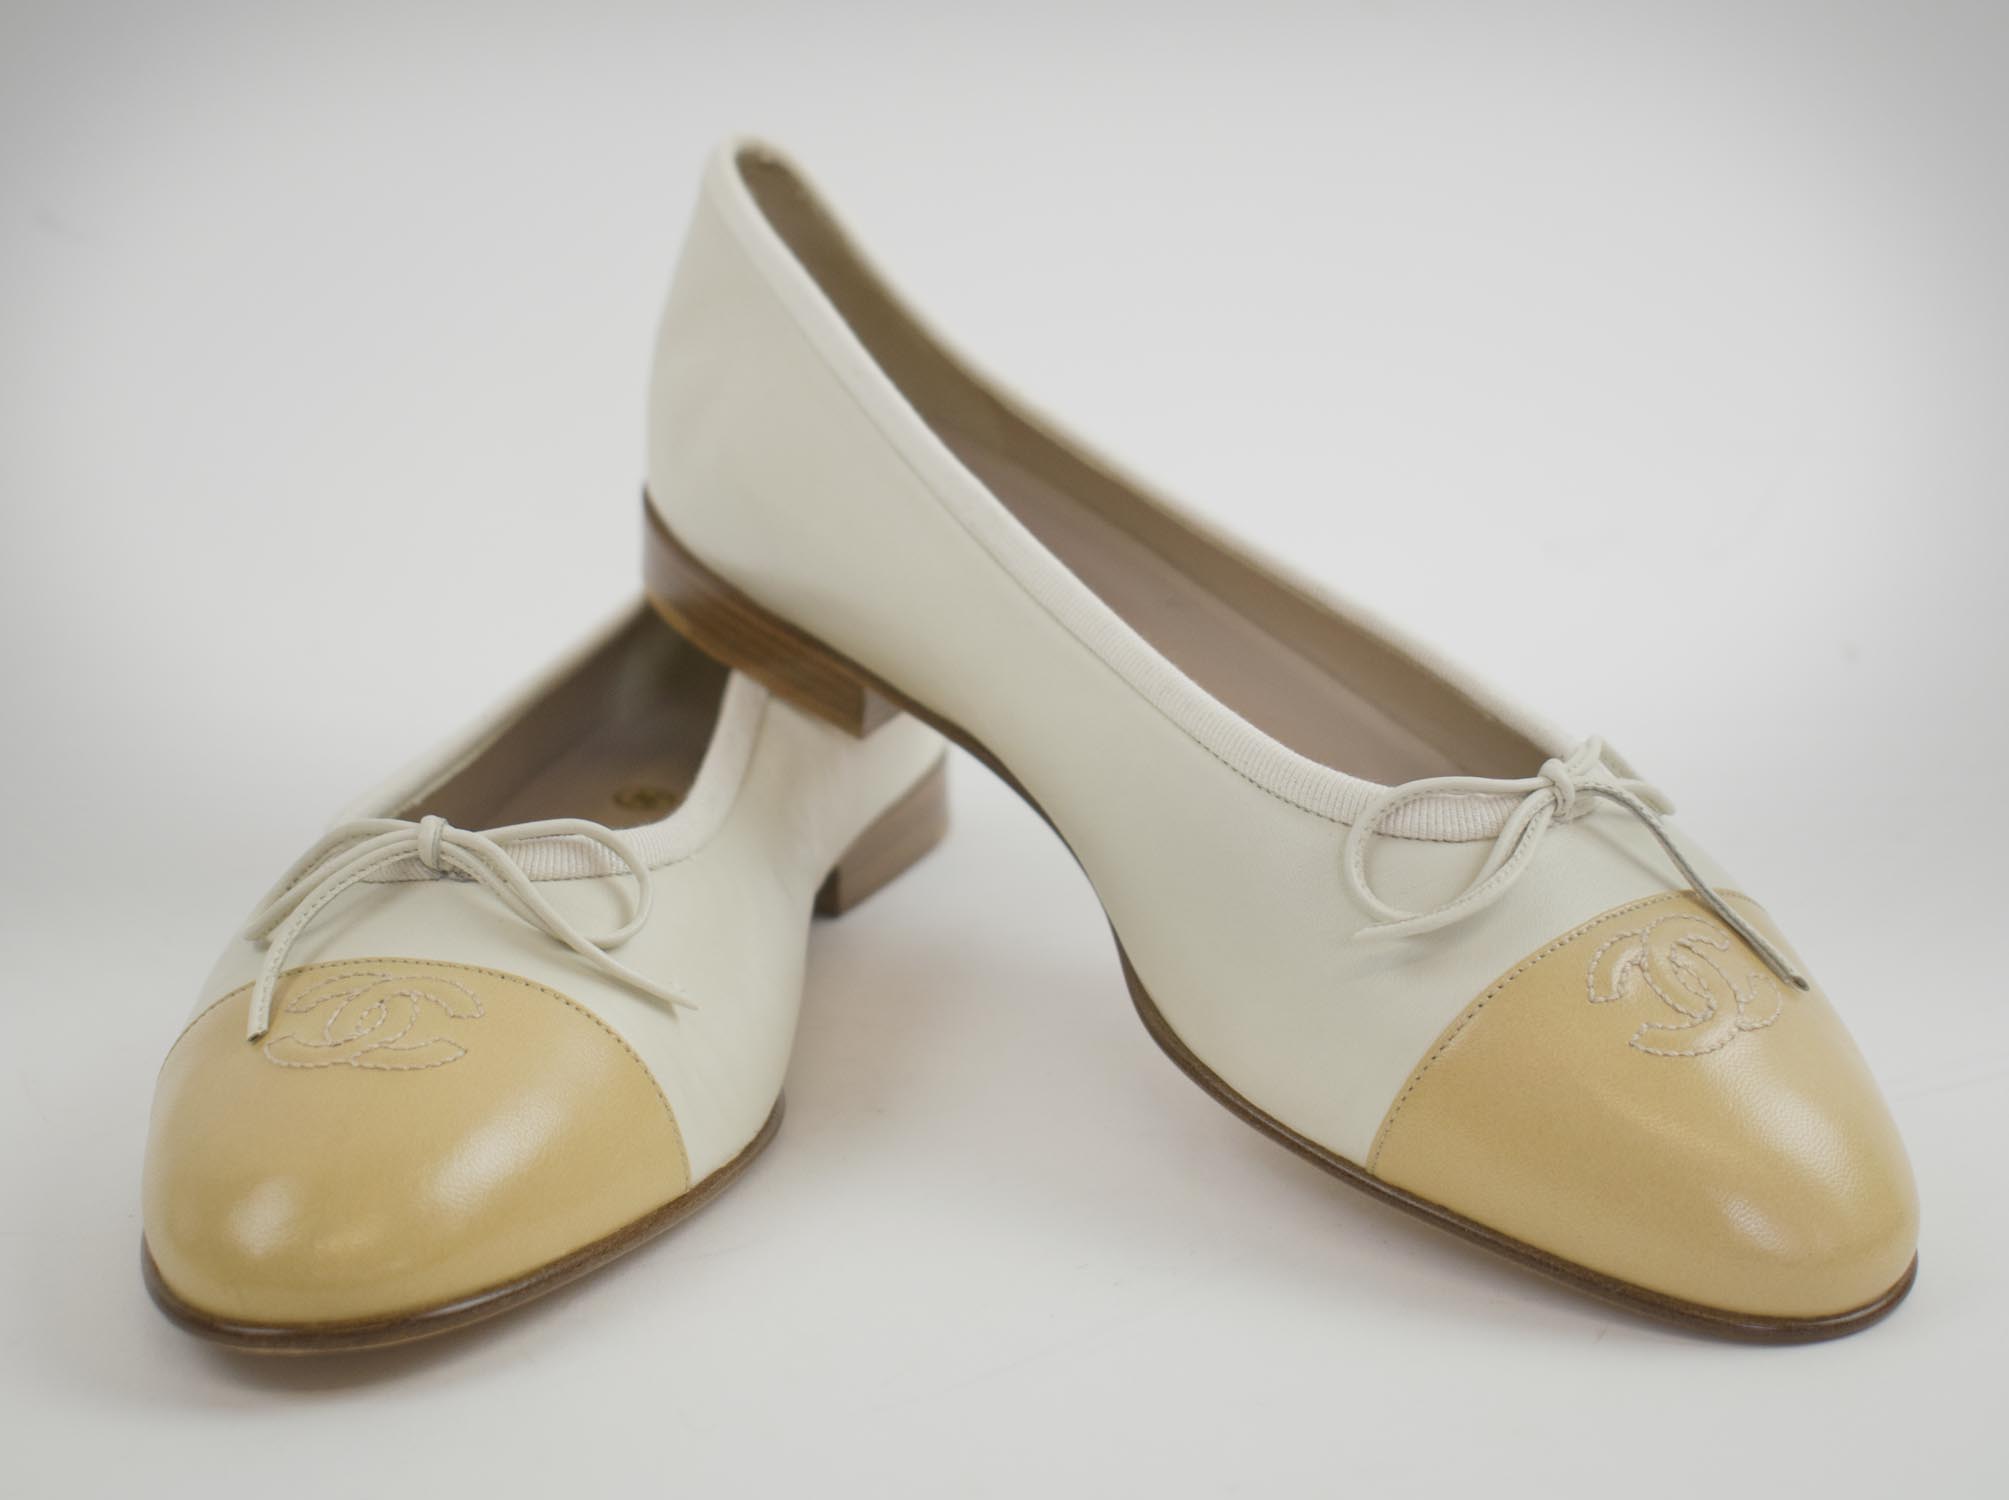 Lot 180 - Chanel Two Tone Ballet Pumps, classic style